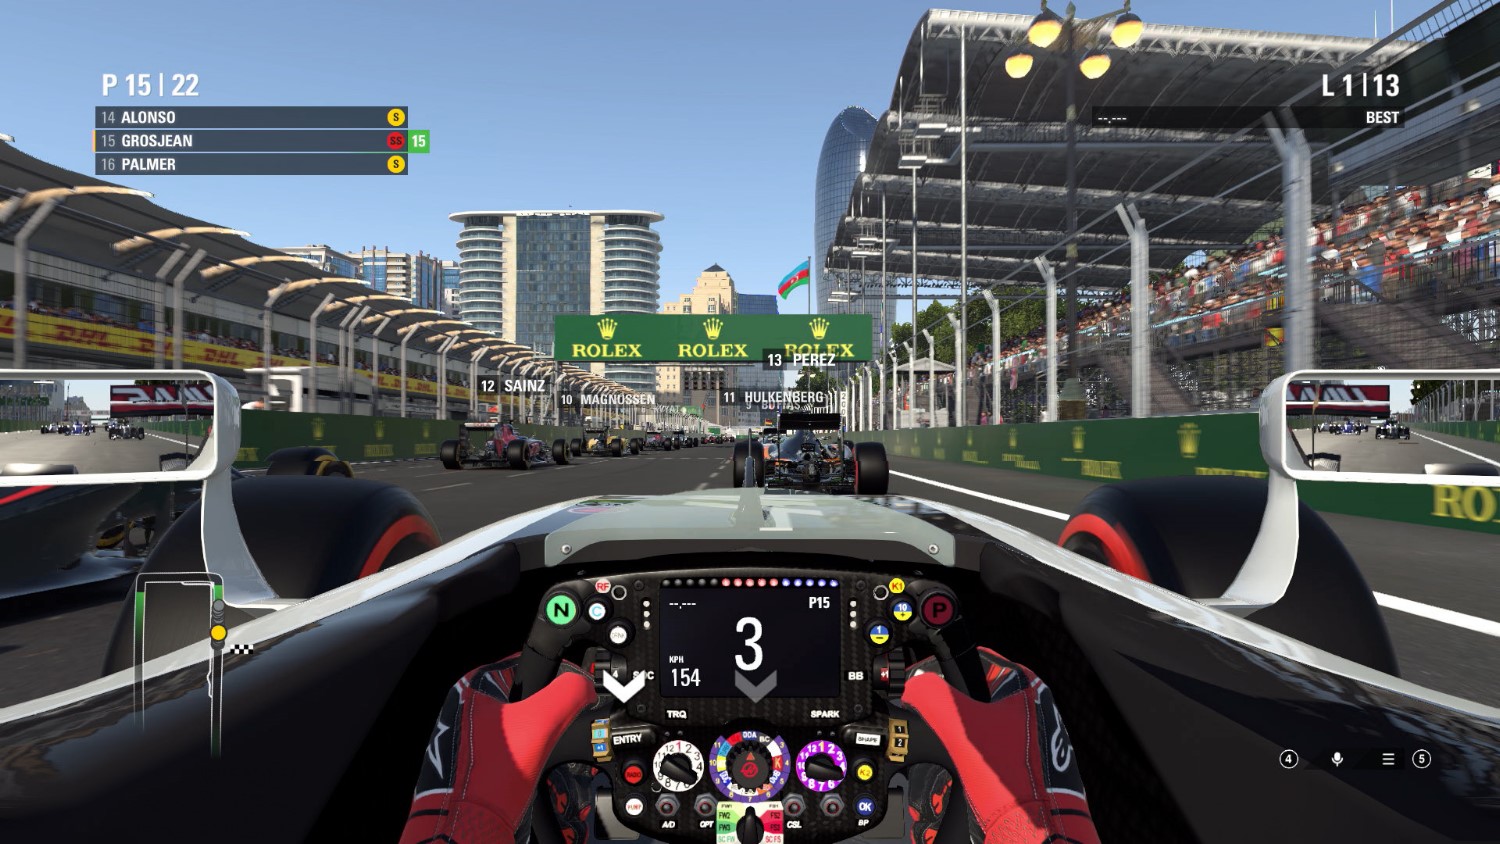 Before buying F1, Liberty tried to buy IndyCar and part of that proposal was online gaming to race the real drivers during the real race, virtual cars superimposed in the real race, real time. The goal to engage a younger fanbase. The 'family' turned Liberty down so they bought F1 instead. The latest survey now shows the average F1 fan age dropping, whereas IndyCar continues its death spiral to an older and older fanbase